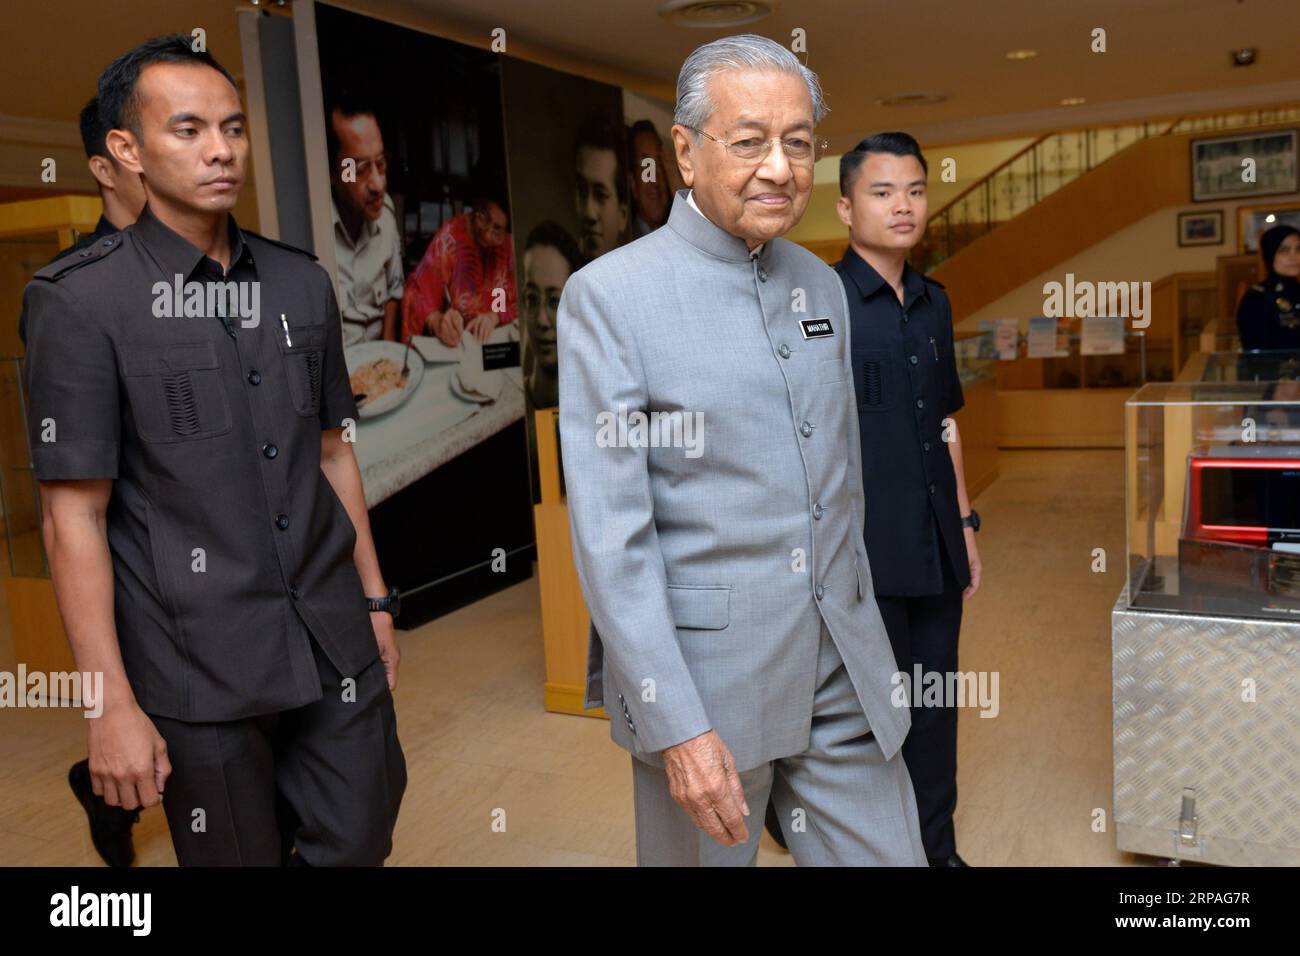 (190509) -- PUTRAJAYA, May 9, 2019 (Xinhua) -- Malaysian Prime Minister Mahathir Mohamad arrives at a press conference to mark the first year since his Pakatan Harapan (PH) coalition won power at the national polls on May 9 last year, in Putrajaya, Malaysia, May 9, 2019. Malaysia has achieved progress in combating corruption and in restoring government institutions after taking over the government in a smooth transition but much remains to be done especially in repairing the national economy, Malaysian Prime Minister Mahathir Mohamad said on Thursday. (Xinhua/Chong Voon Chung) MALAYSIA-PUTRAJA Stock Photo